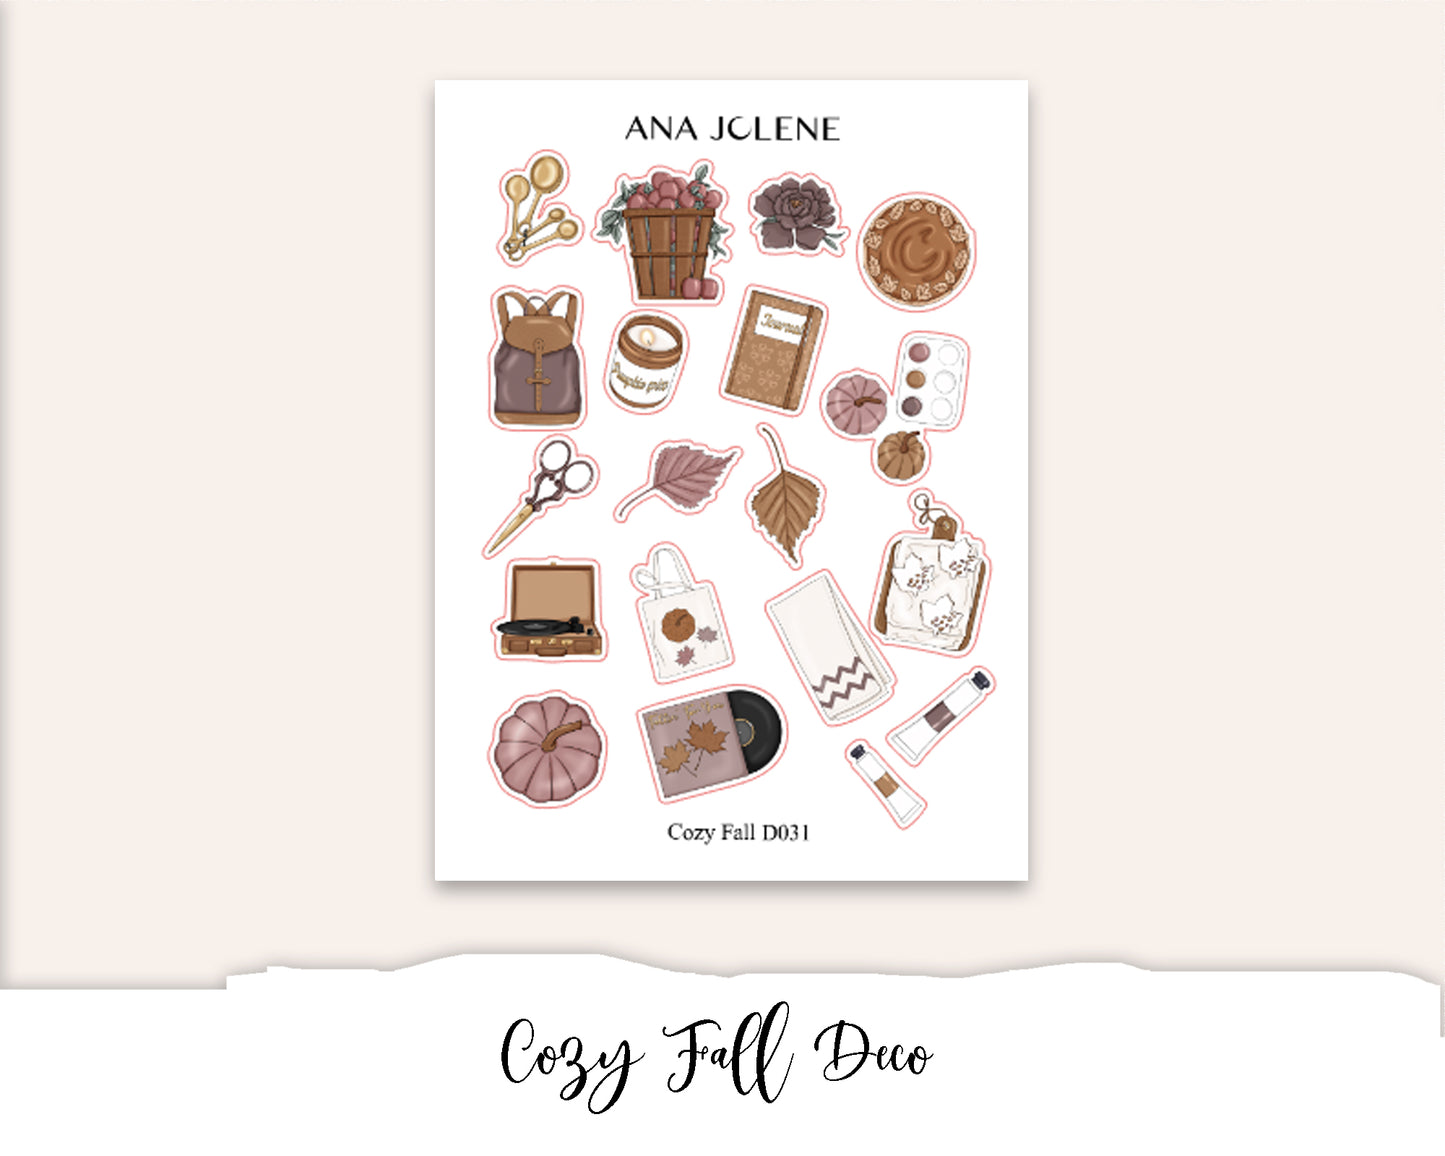 COZY FALL EC A5 Monthly Planner Sticker Kit